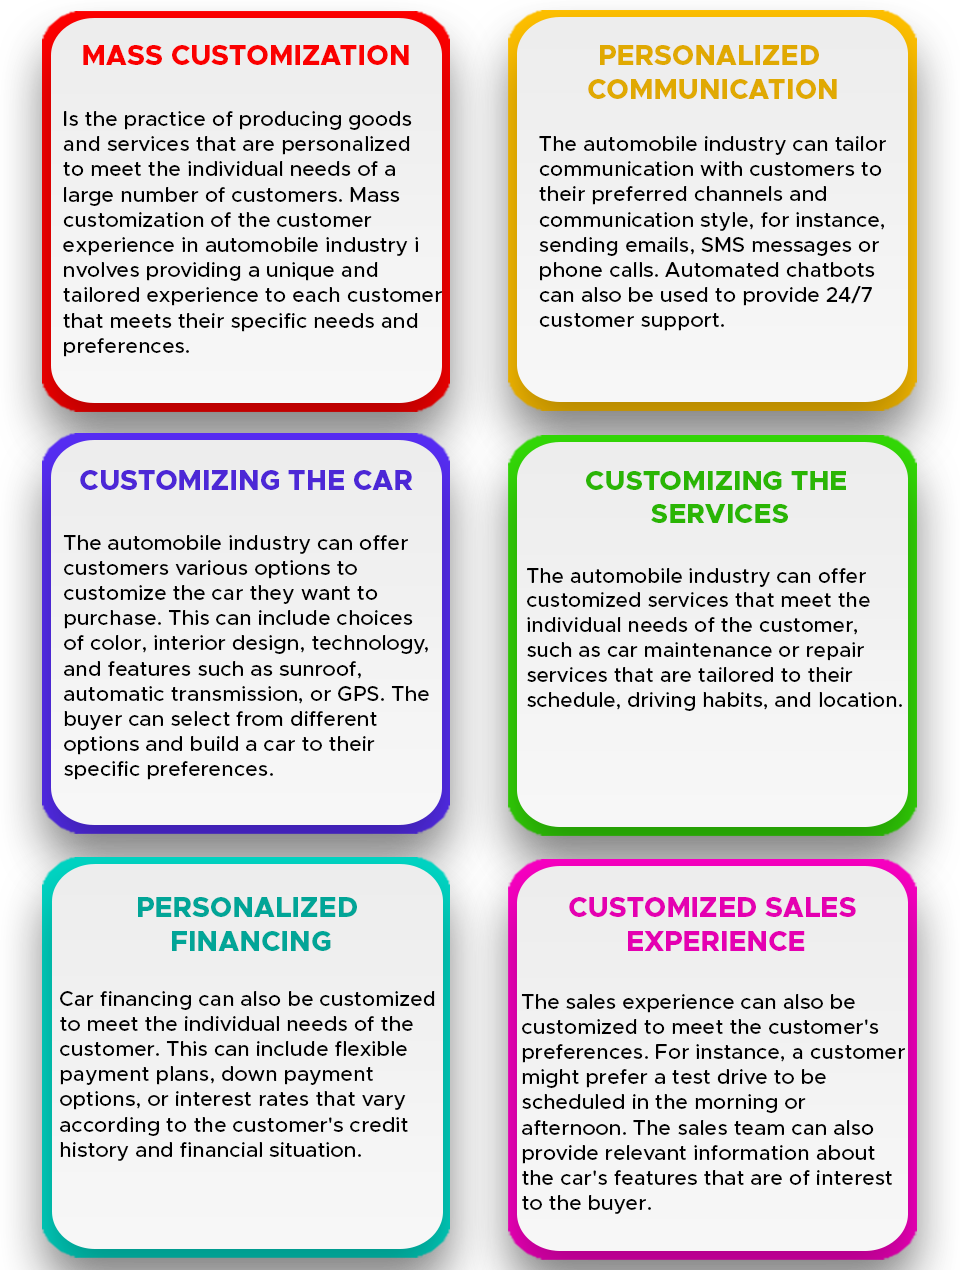 Green Design and Mass customization of the customer experience